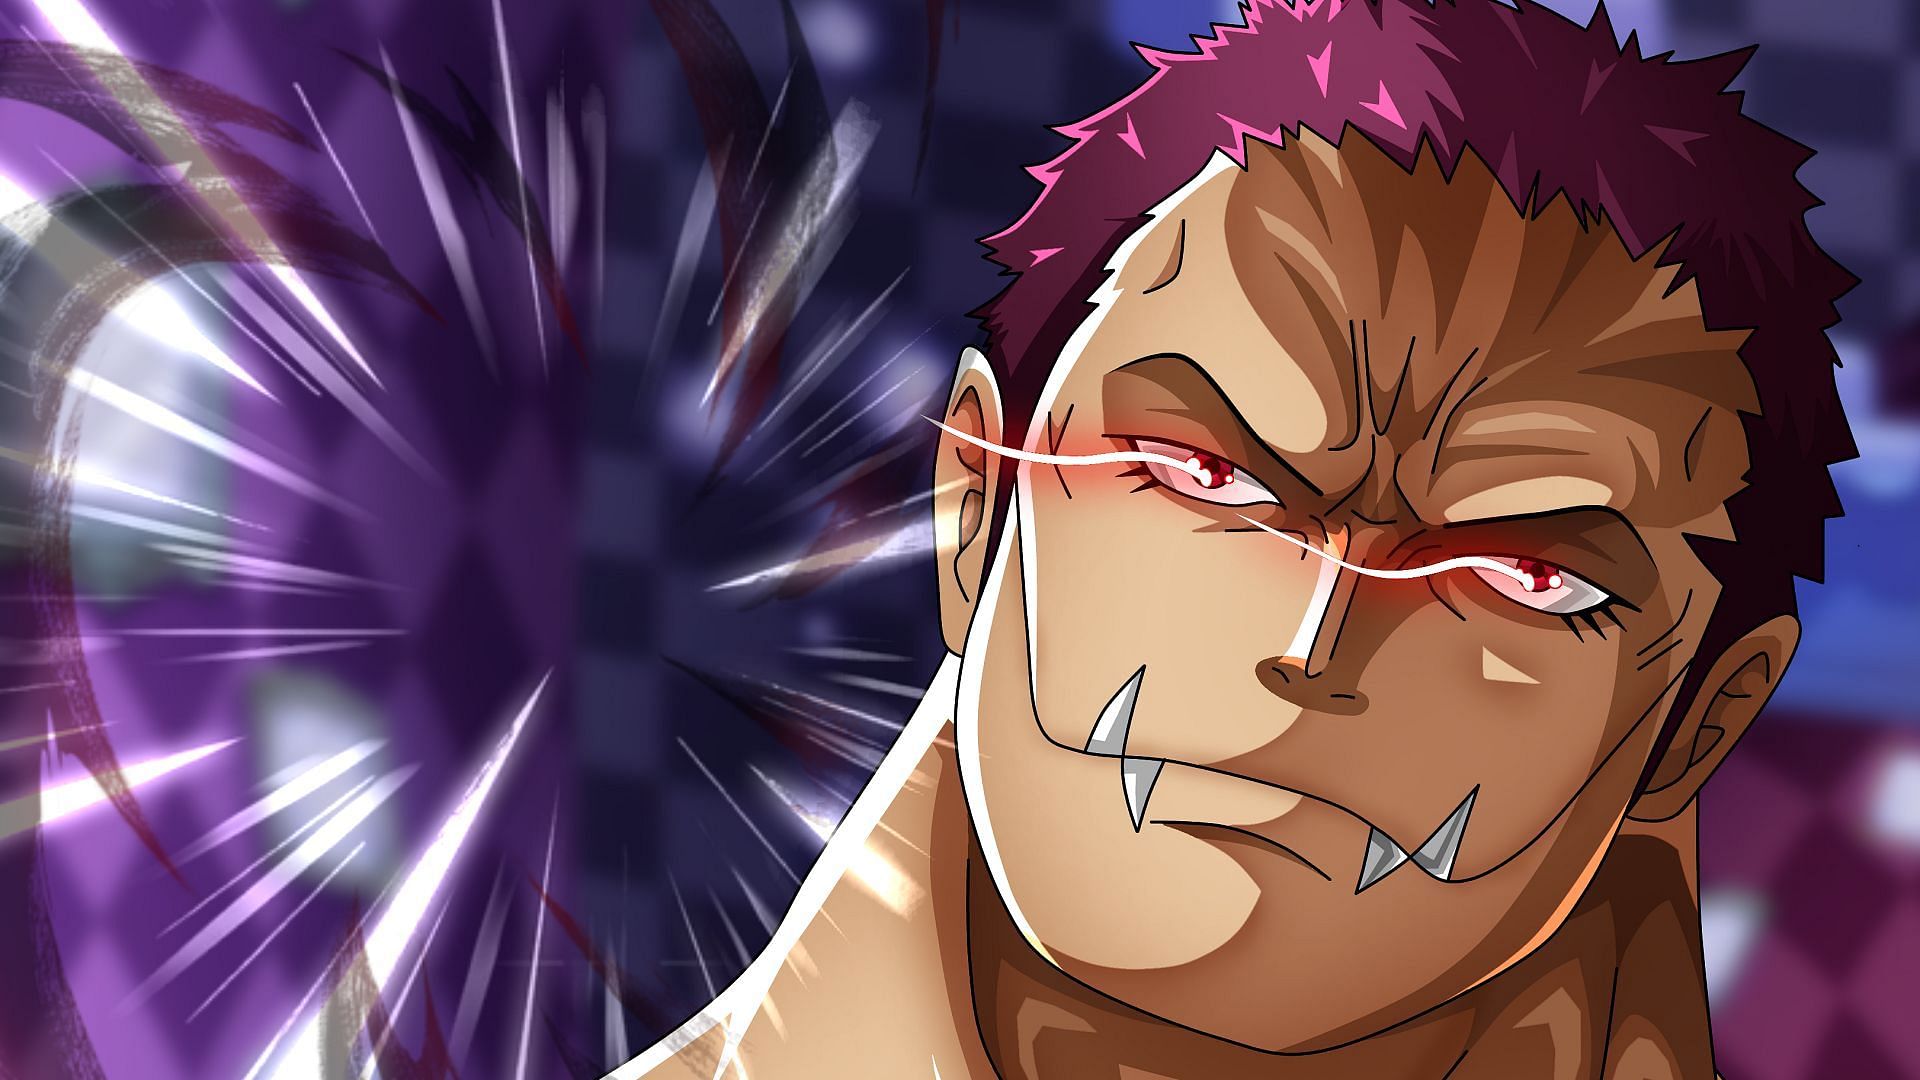 5 One Piece characters who Katakuri can defeat (& 5 he can't)